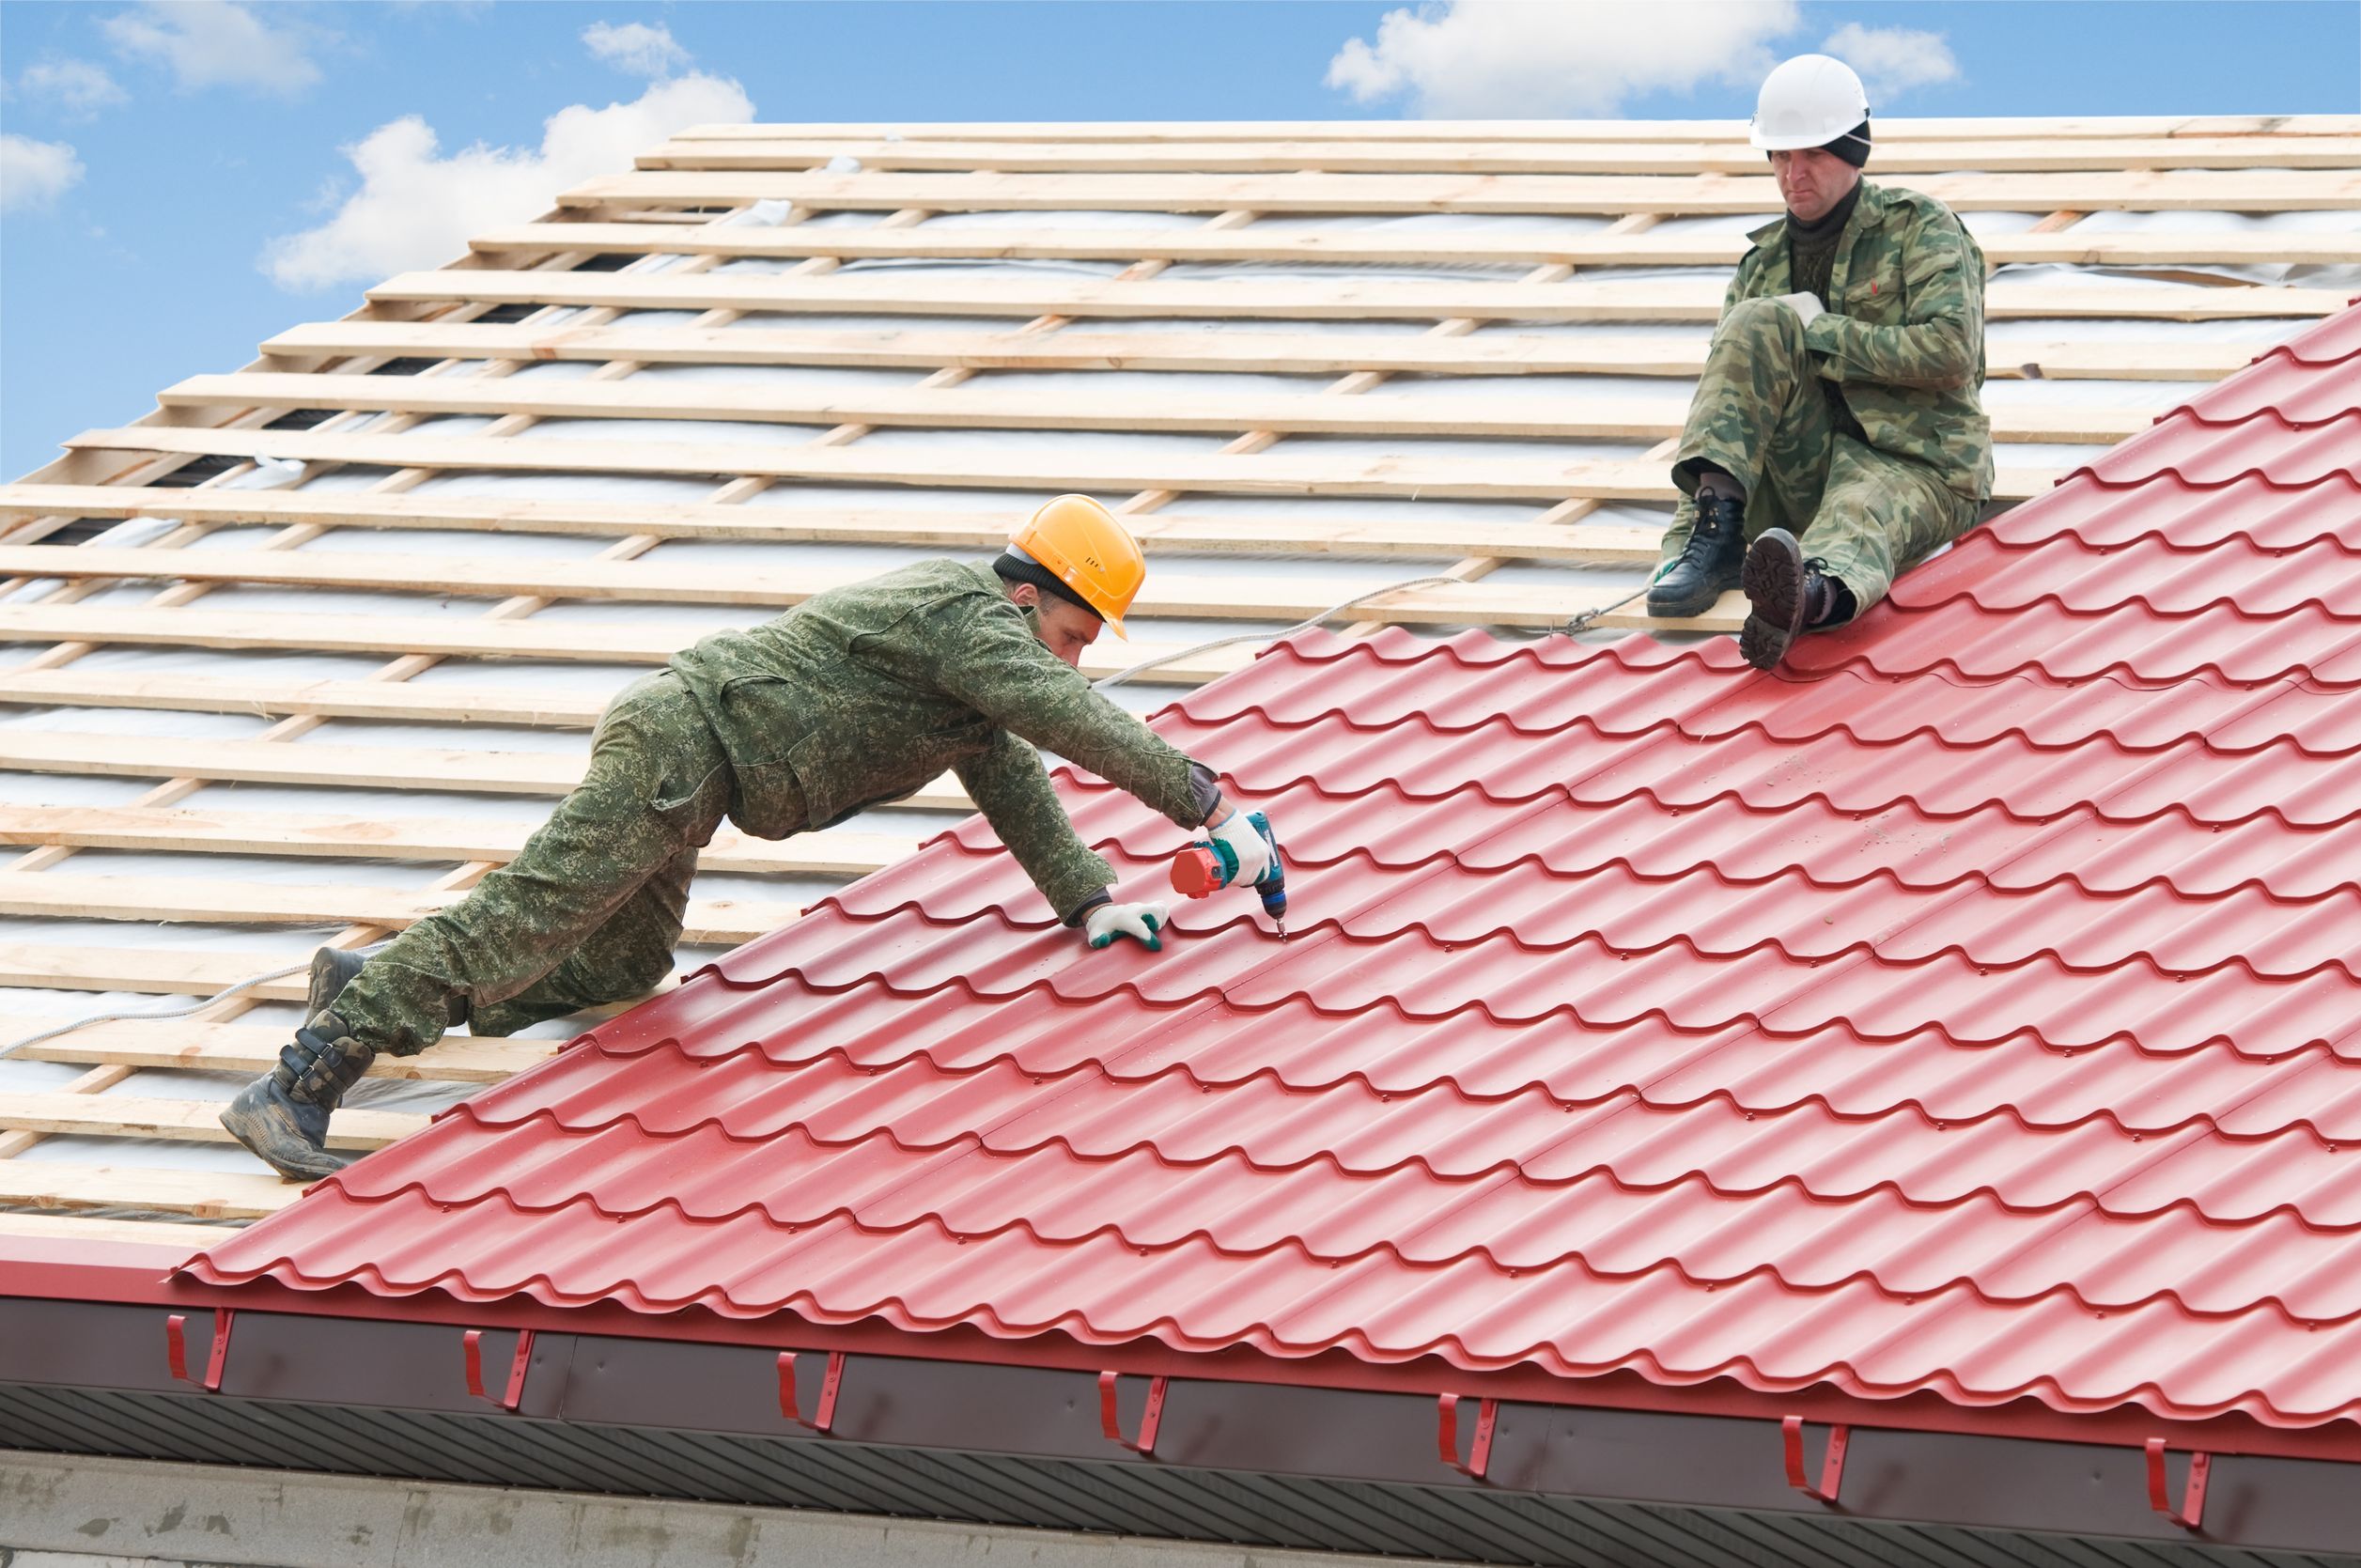 Top 3 Reasons to Consider Hiring a Professional Roofing Company in Franklin, TN